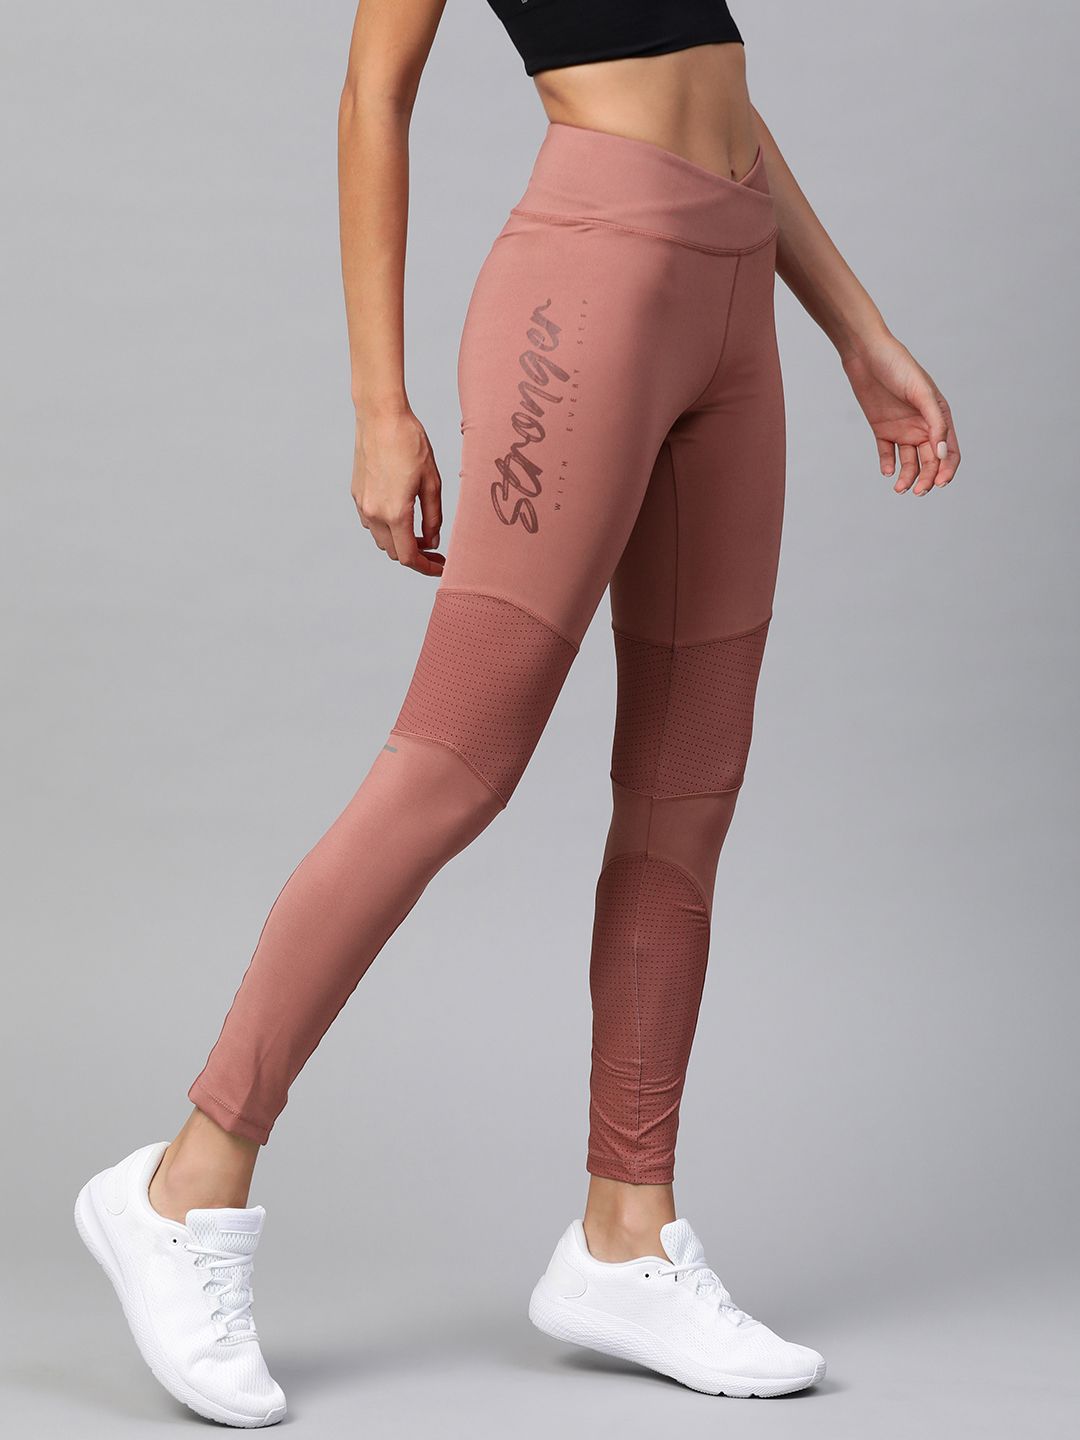 Alcis Women Peach-Coloured Printed Detail Cropped Tights Price in India